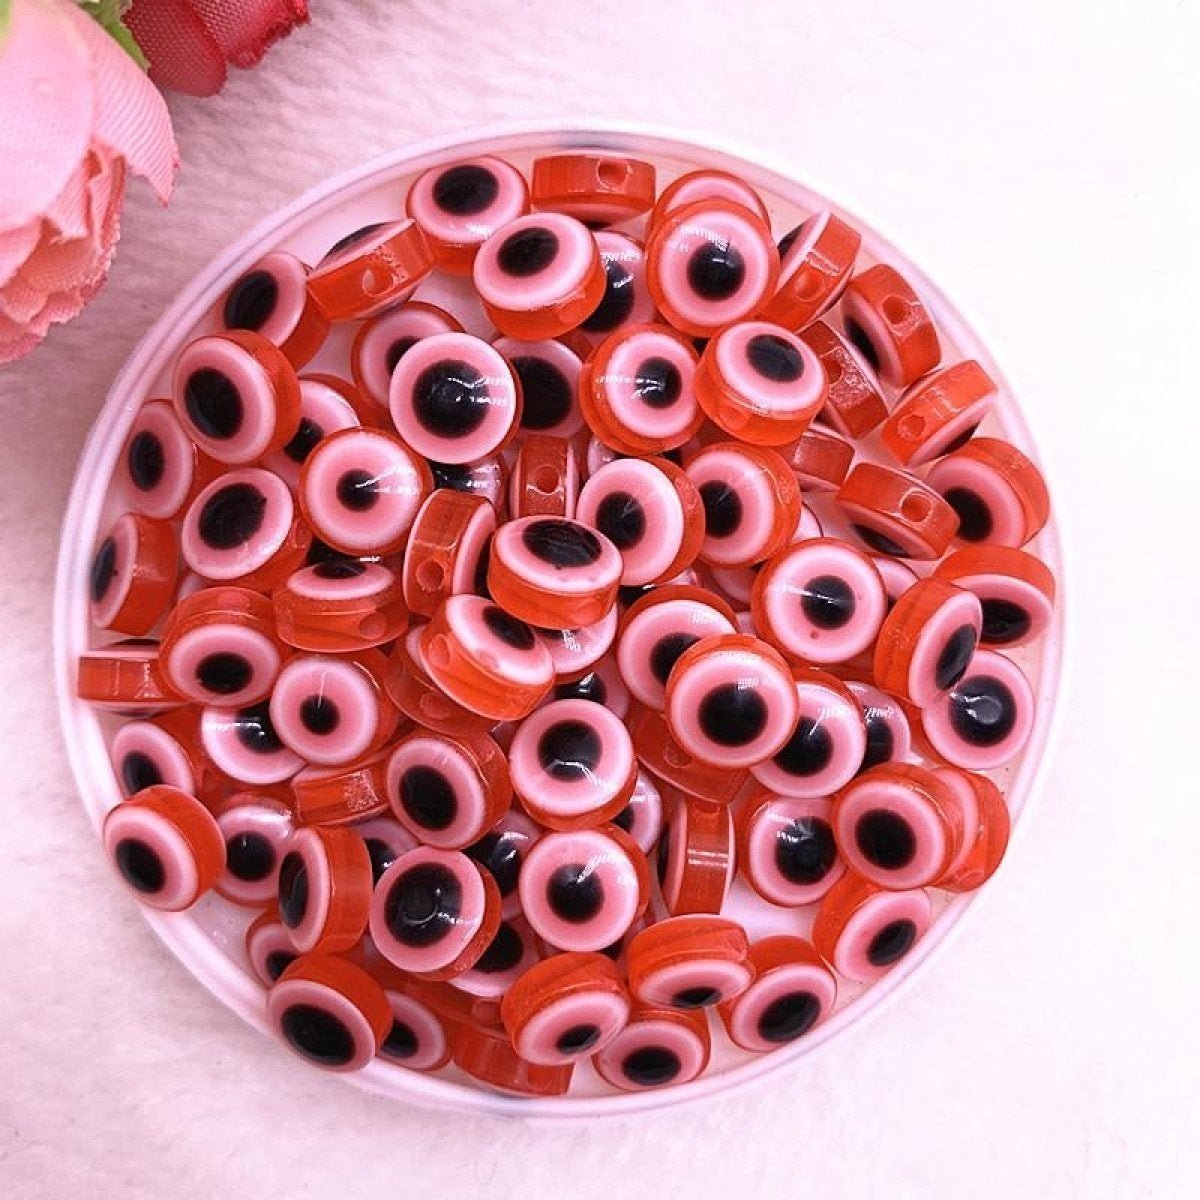 48pcs 8/10mm Resin Spacer Beads Double Sided Eyes for Jewelry Making DIY Bracelet Beads Flat Backing - Red 8mm - - Asia Sell